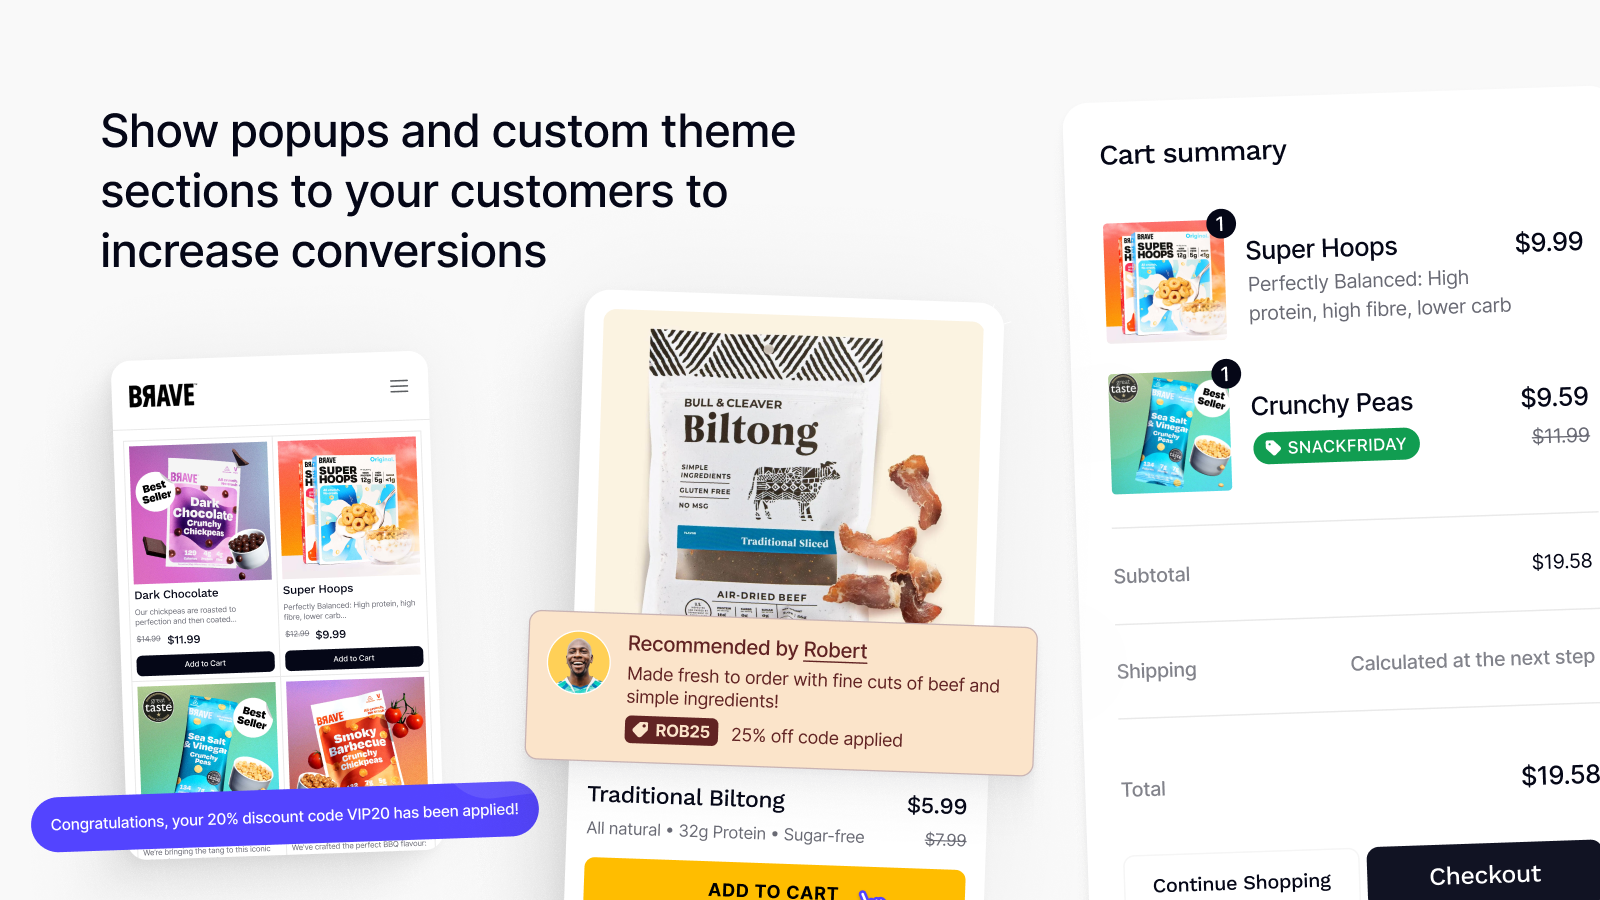 Boost conversions with popups and custom theme sections